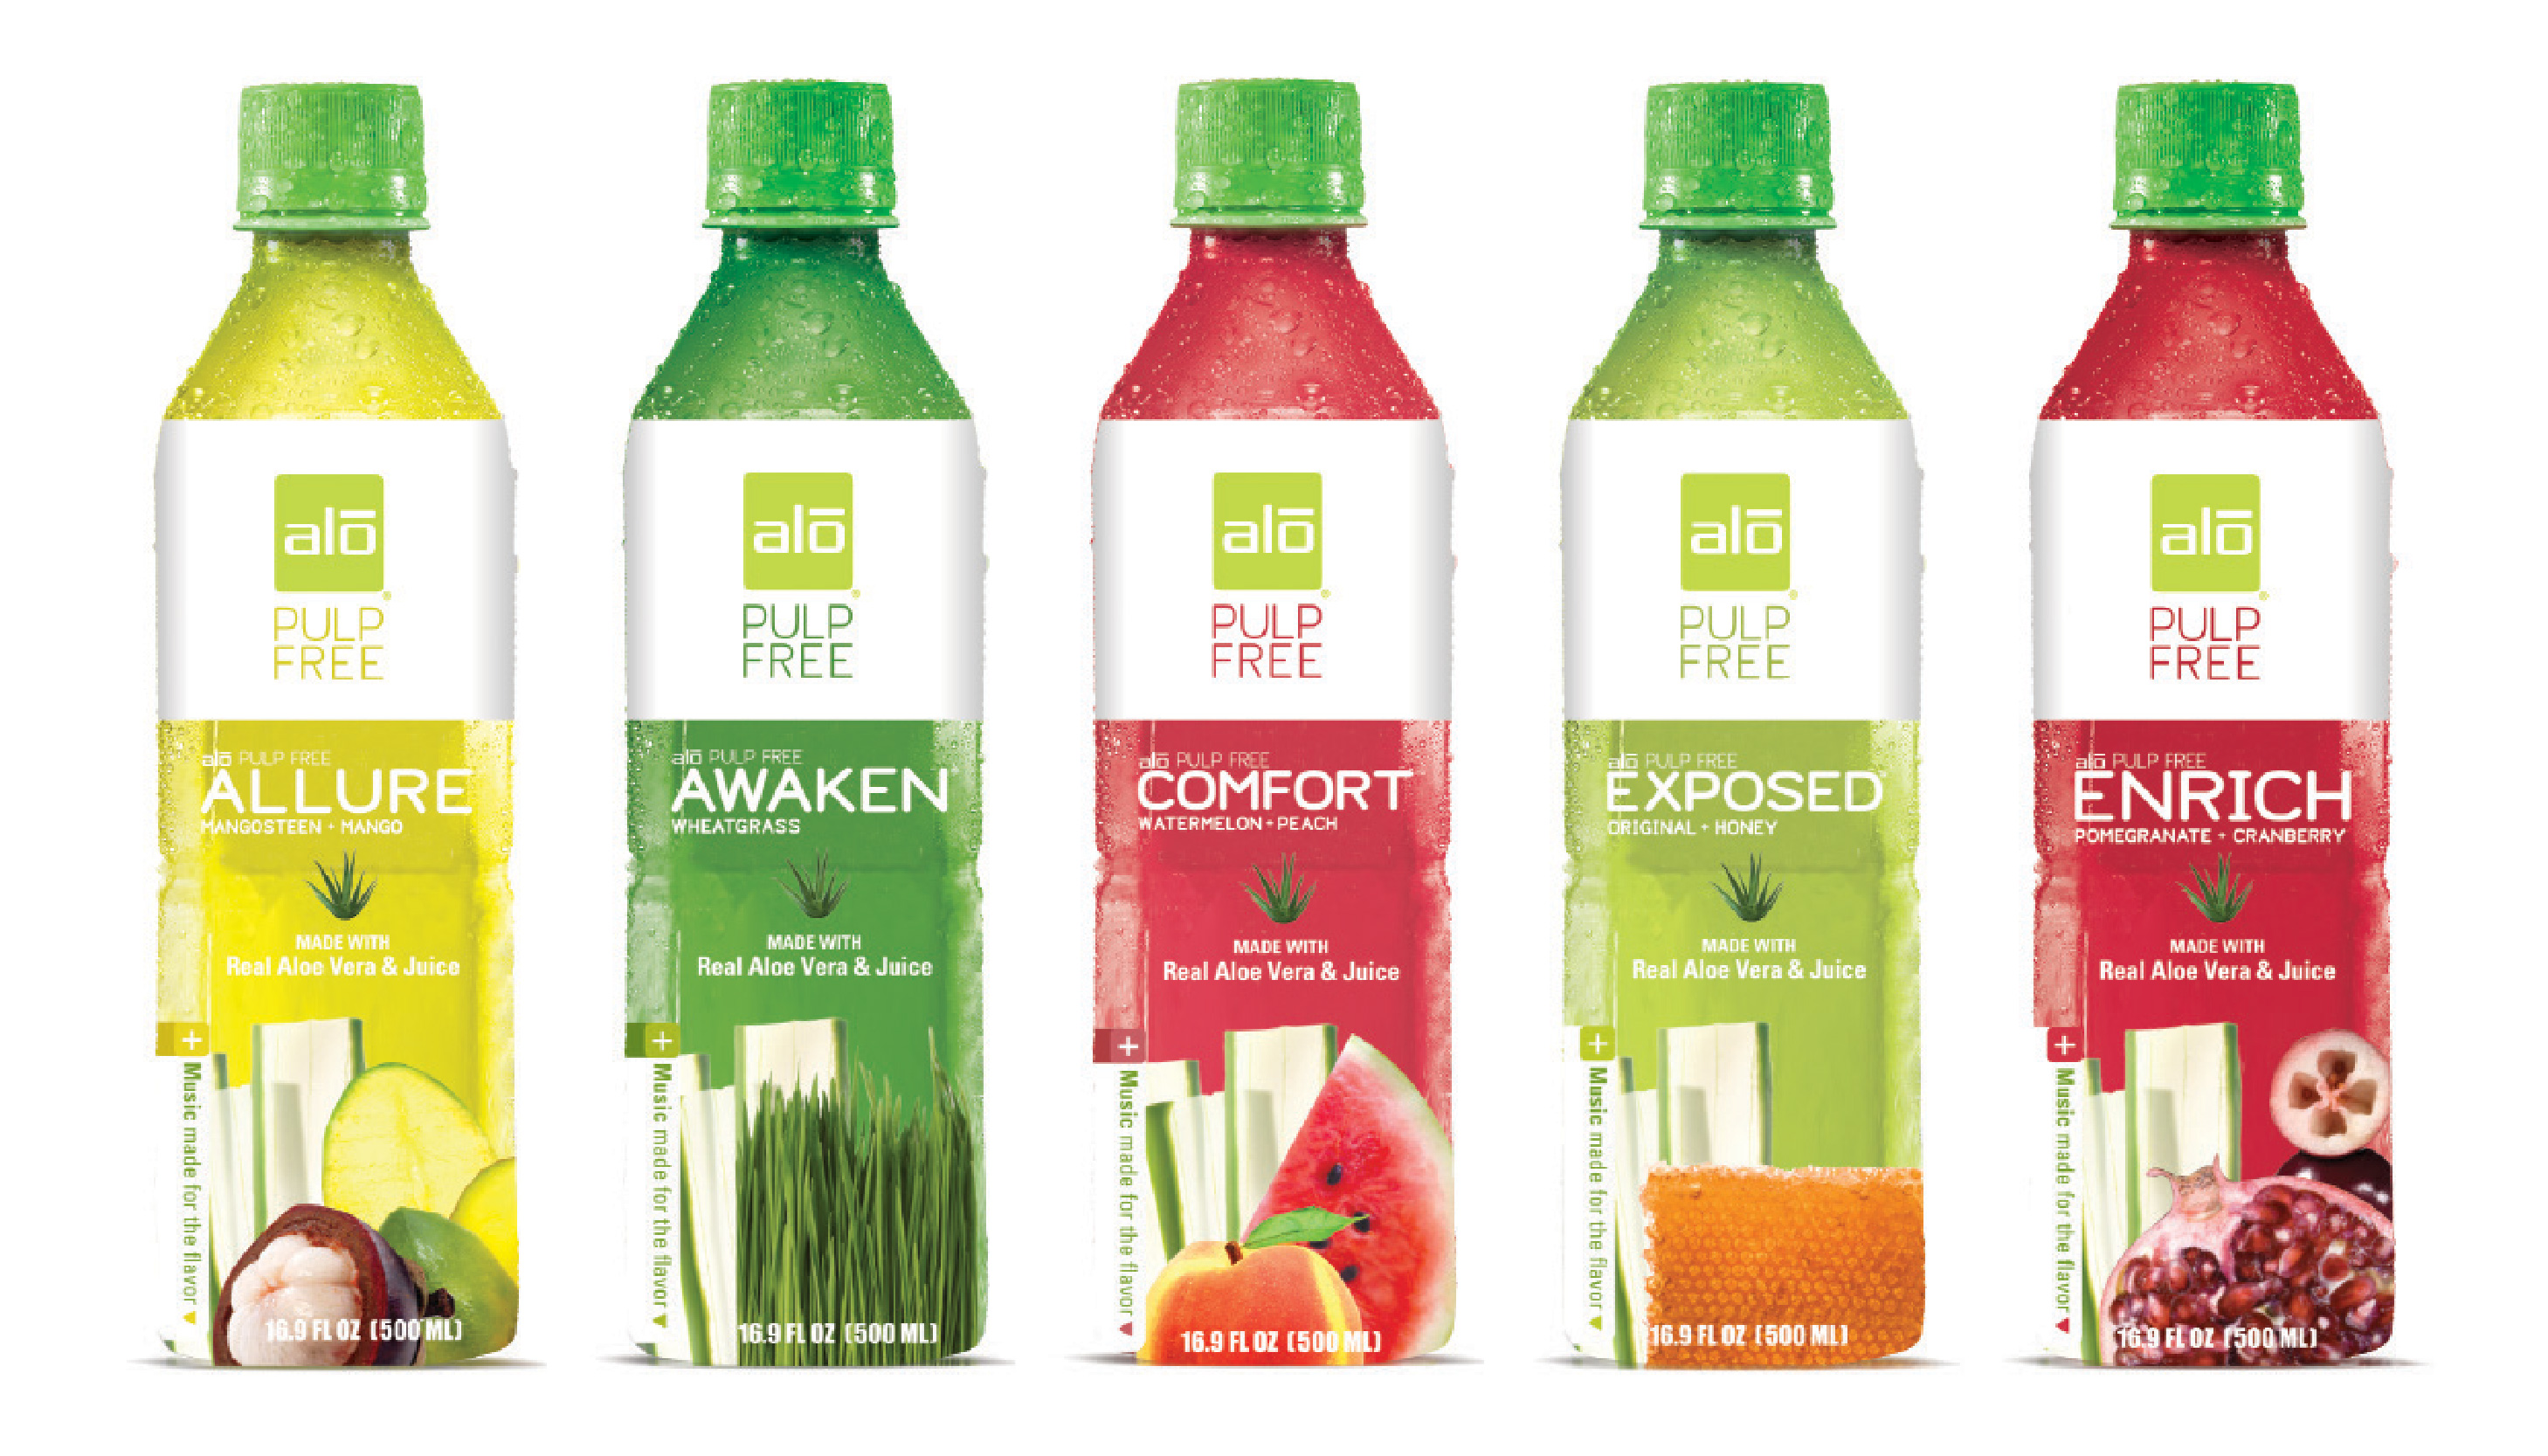 Check out the ALO Drink New Lineup - Pulp-Free